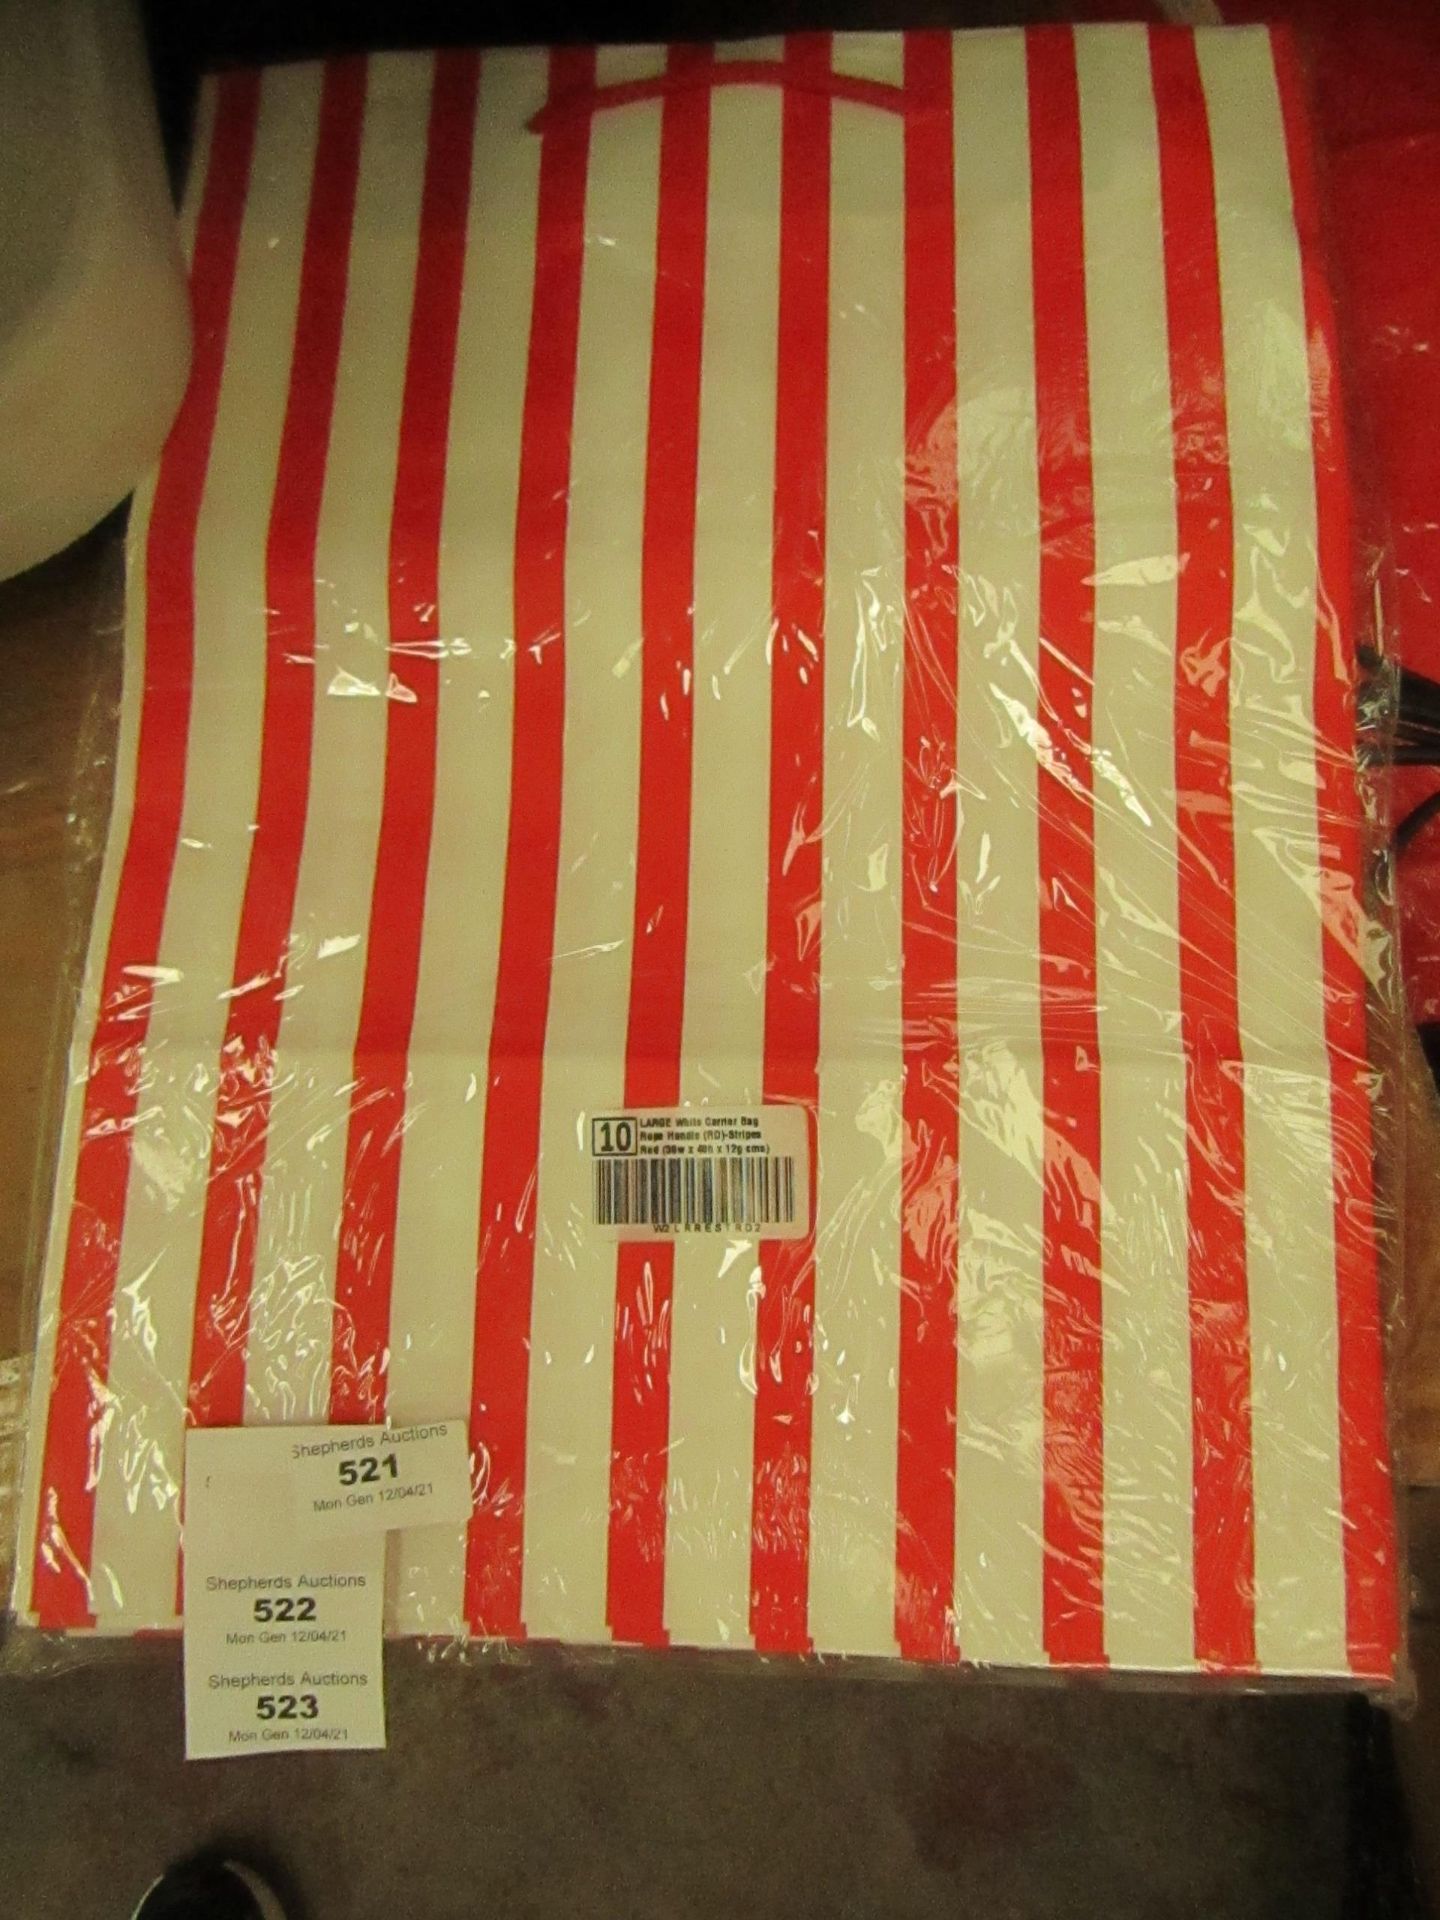 5x Pack of 10 Large, Red & White Carrier Bags with Rope Handles - New & Packaged.